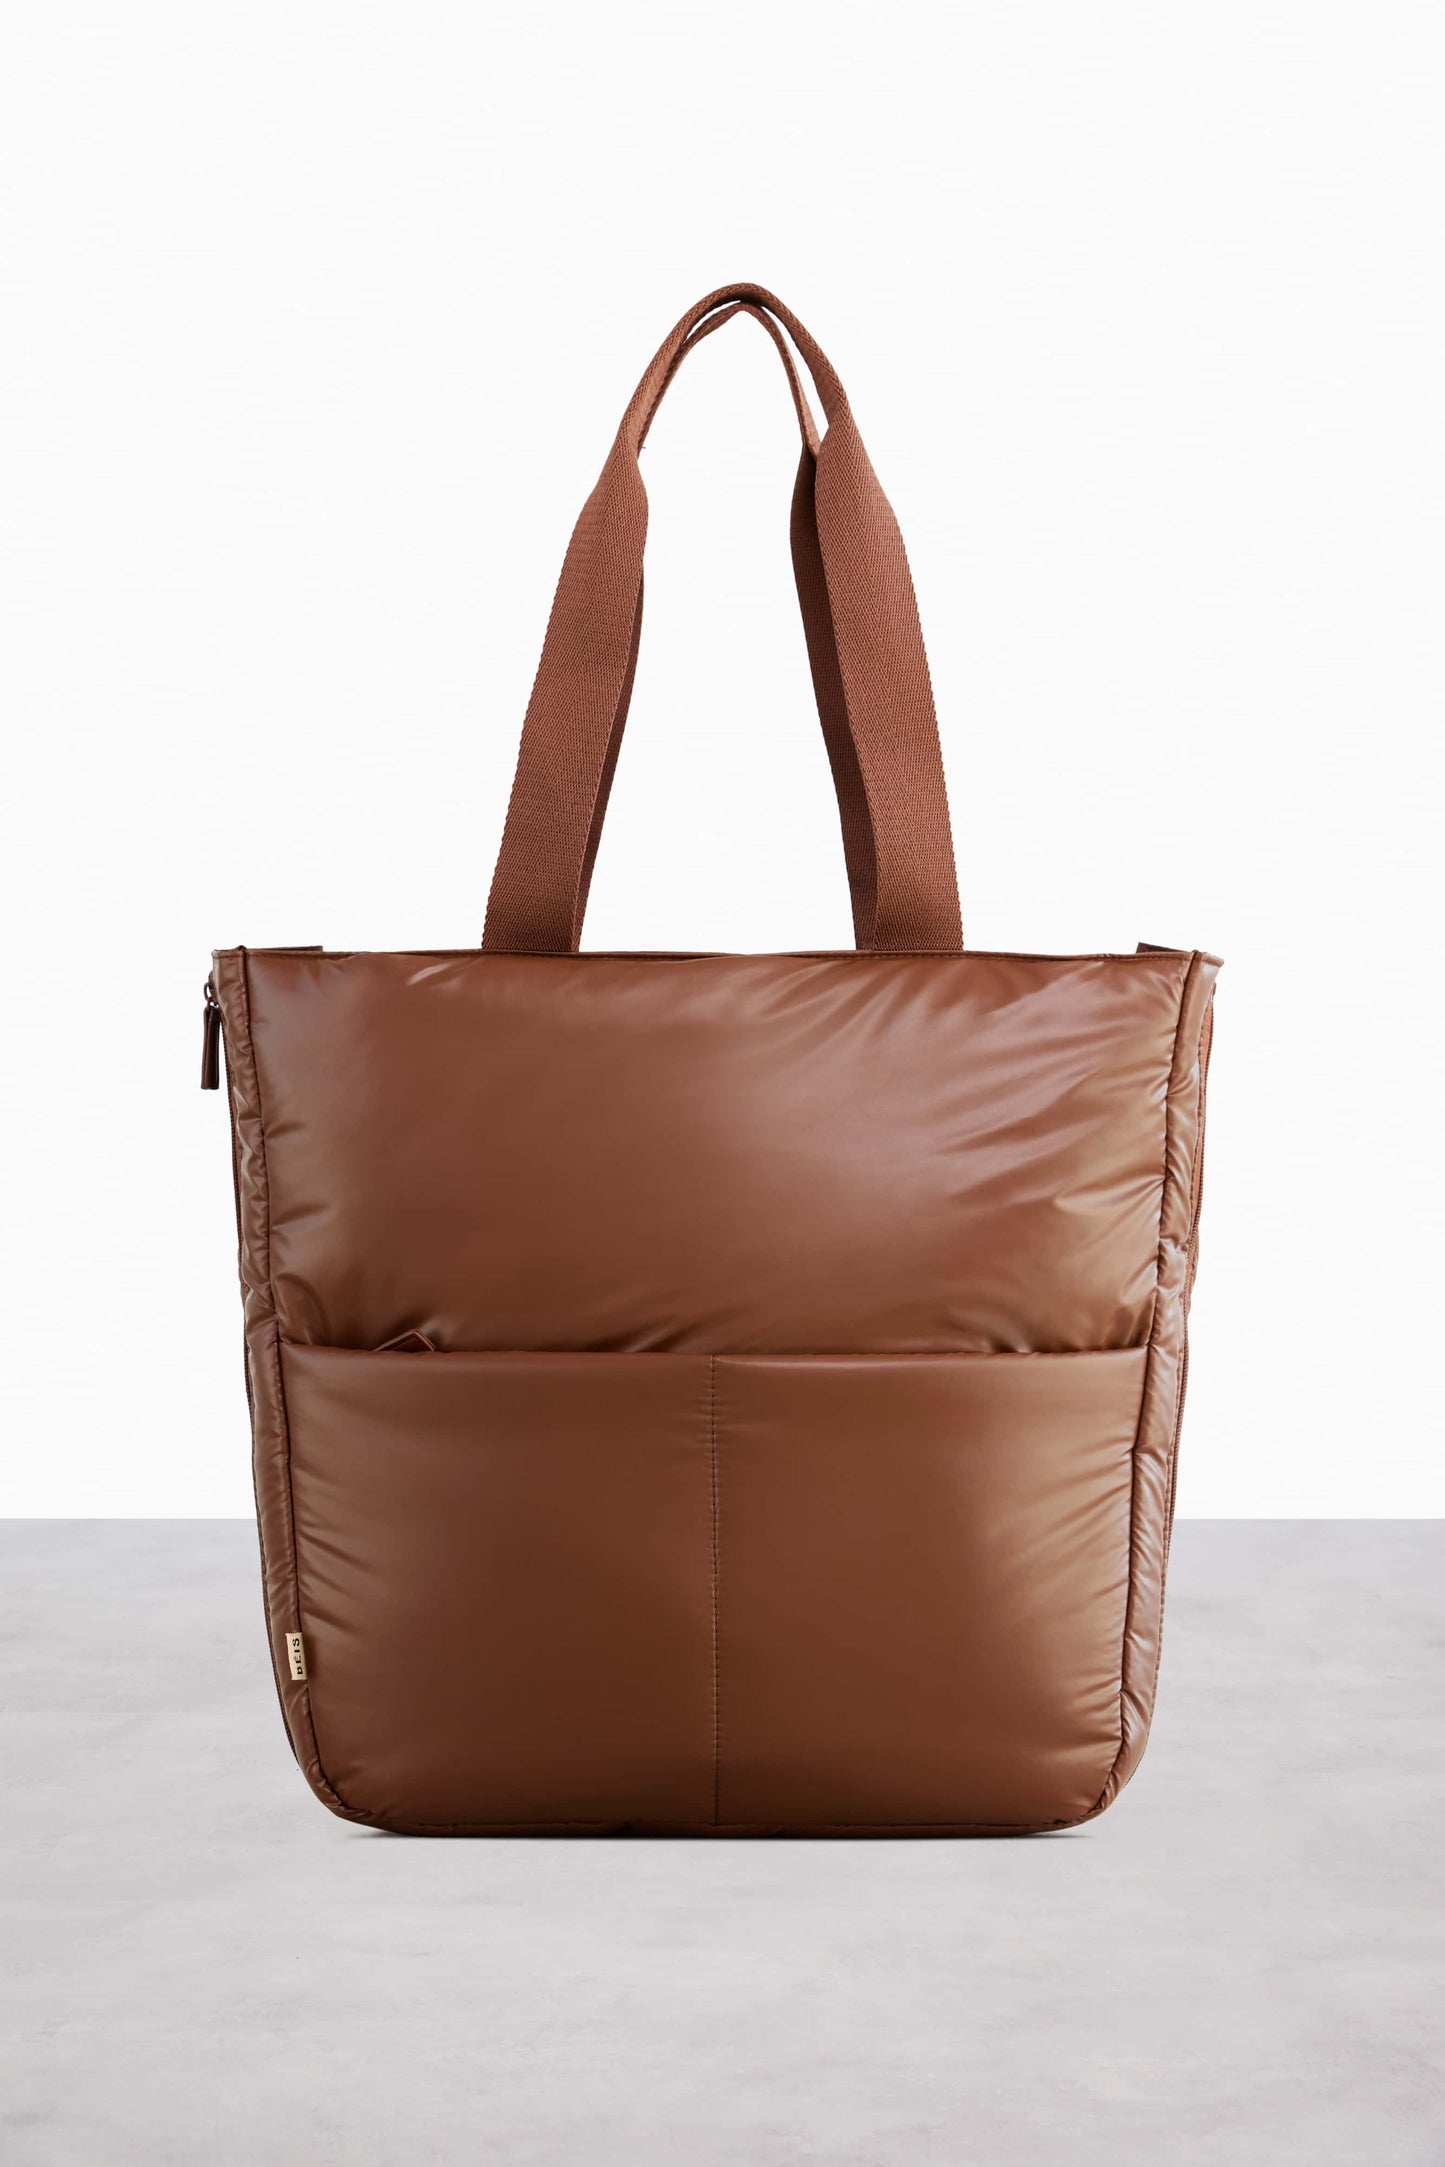 The Expandable Tote in Maple